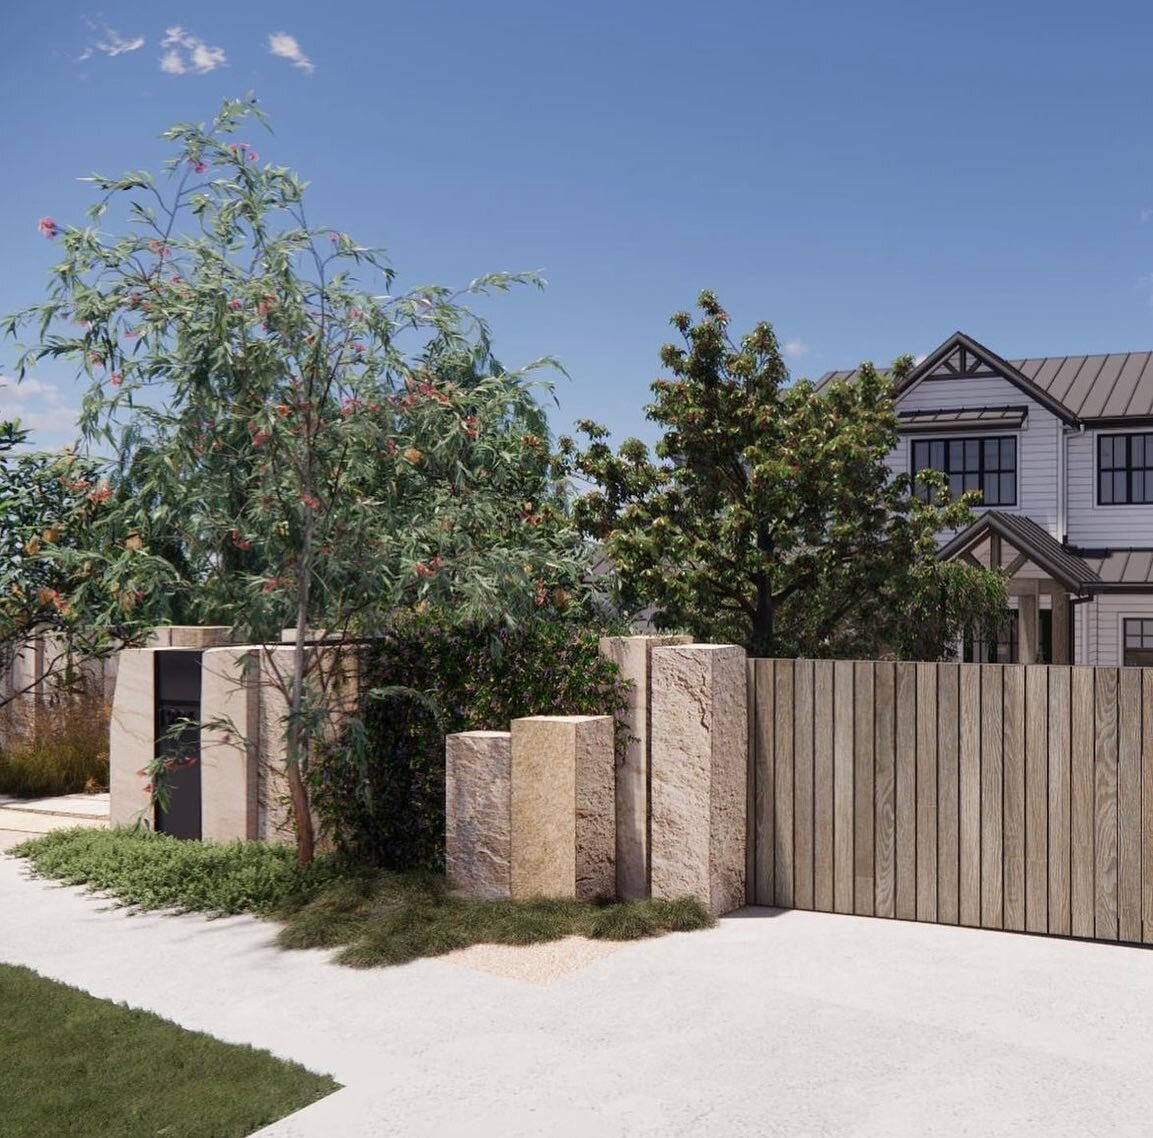 New Front Fence at our custom 515m2 Spilt Level 2 Storey Home coming soon to Mulgoa&hellip; Watch this space for 2024 😍 🏡 🌳 ☀️ 
Landscaping @ paul.alexander.landscape 

▪️6Bedrooms &amp; 5Bathrooms
▪️Open Plan Family / Dining / Kitchen 
▪️Den Room